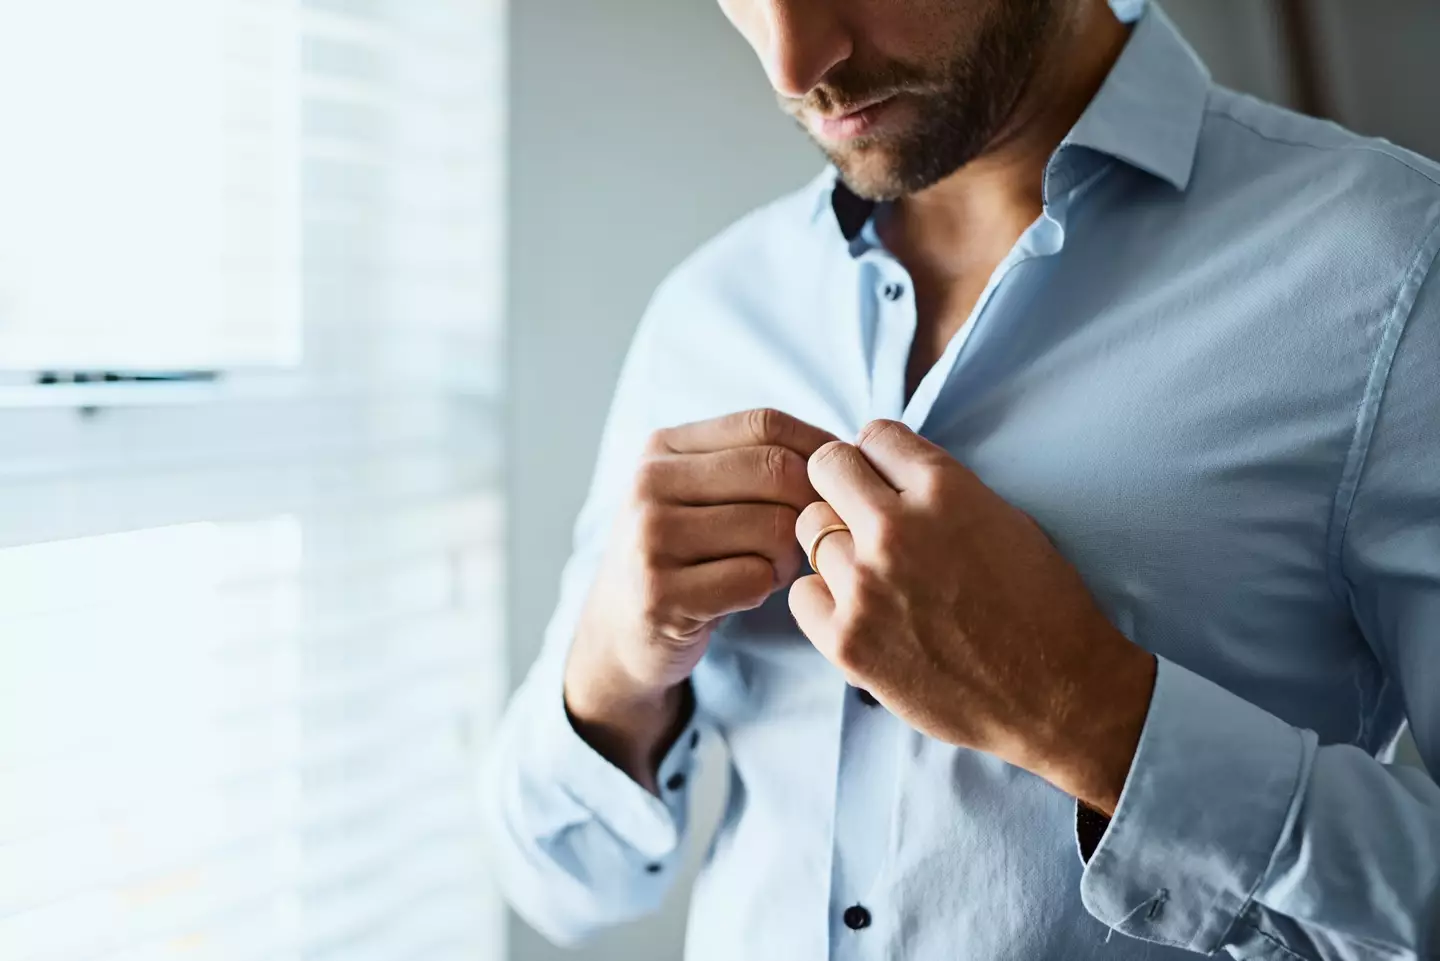 Men's buttons are on the right side of their shirt.